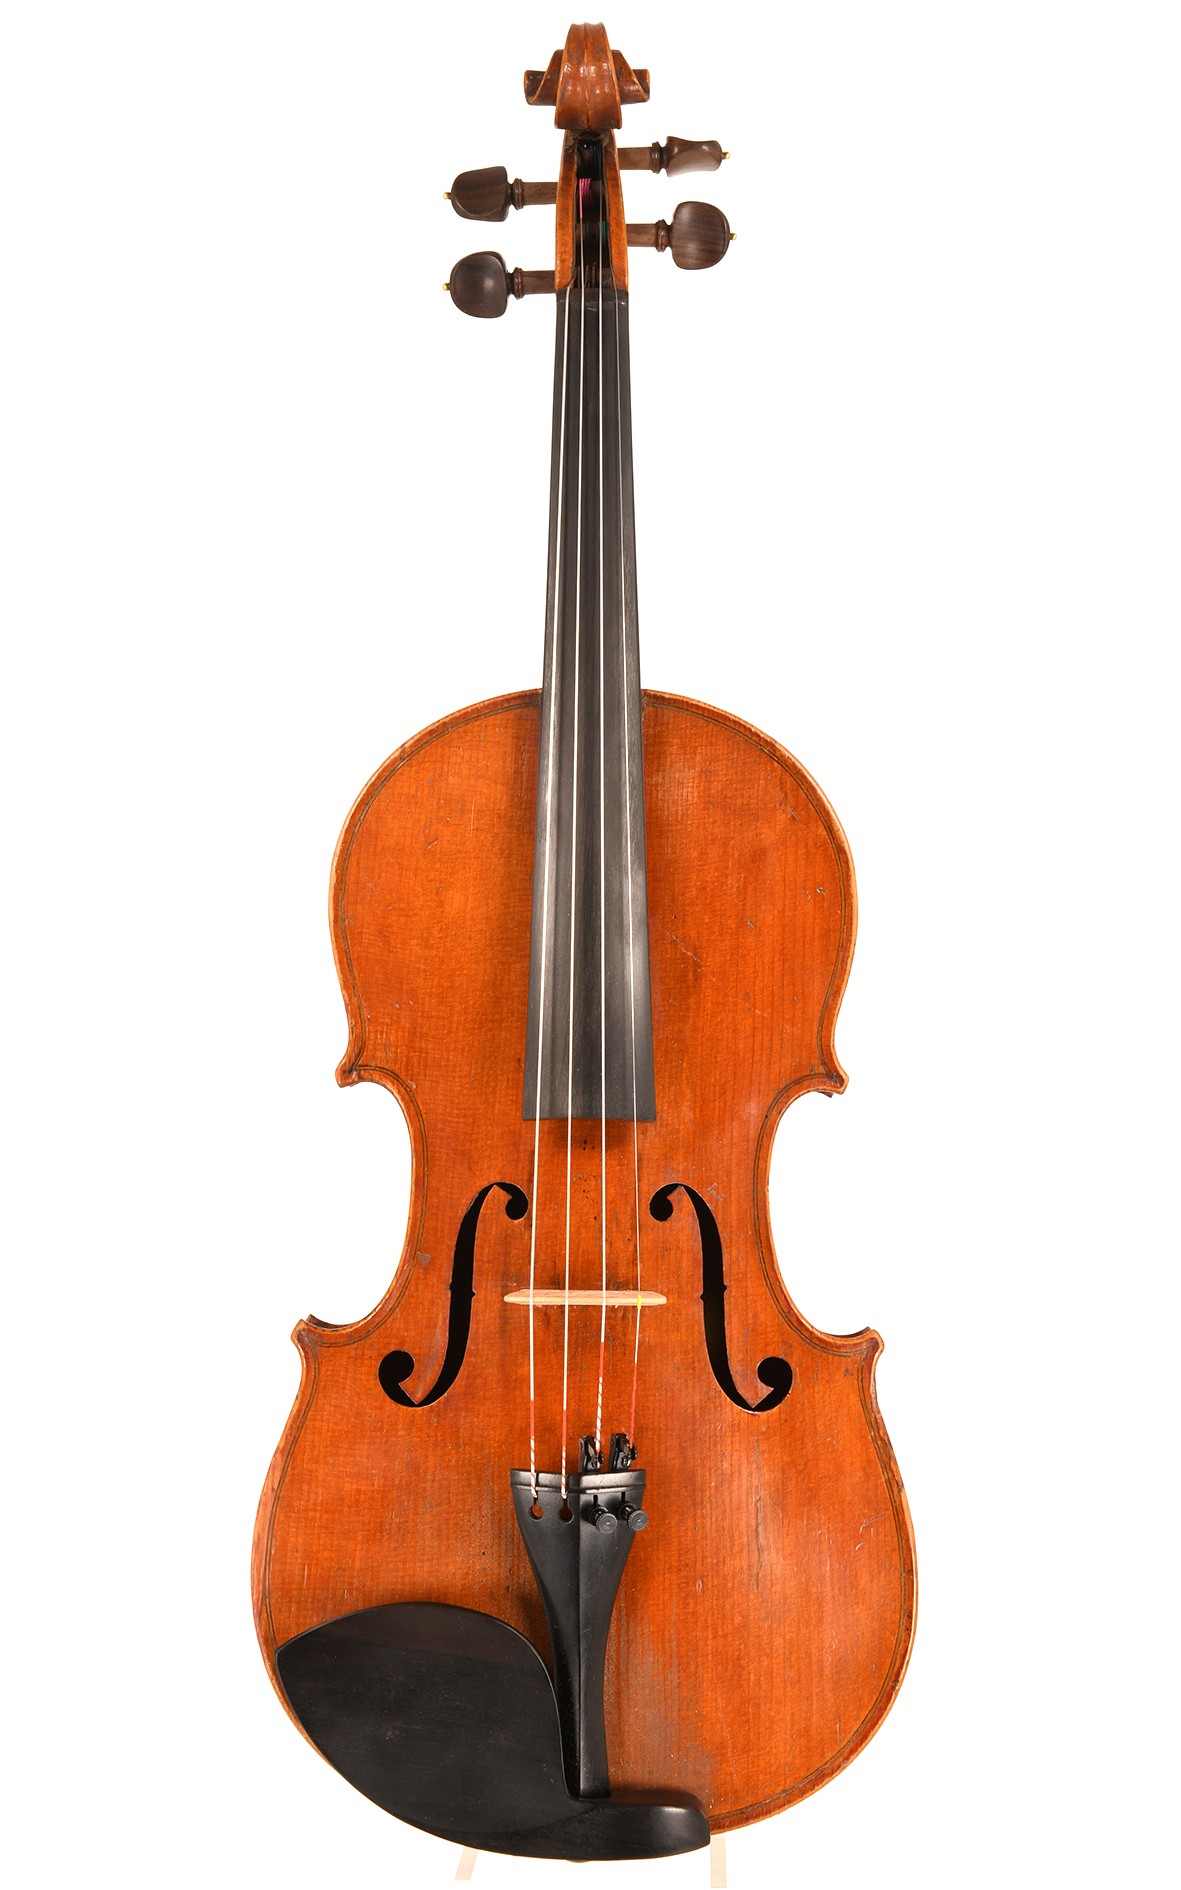 Antique French violin by J.T.L., Mirecourt approx. 1900